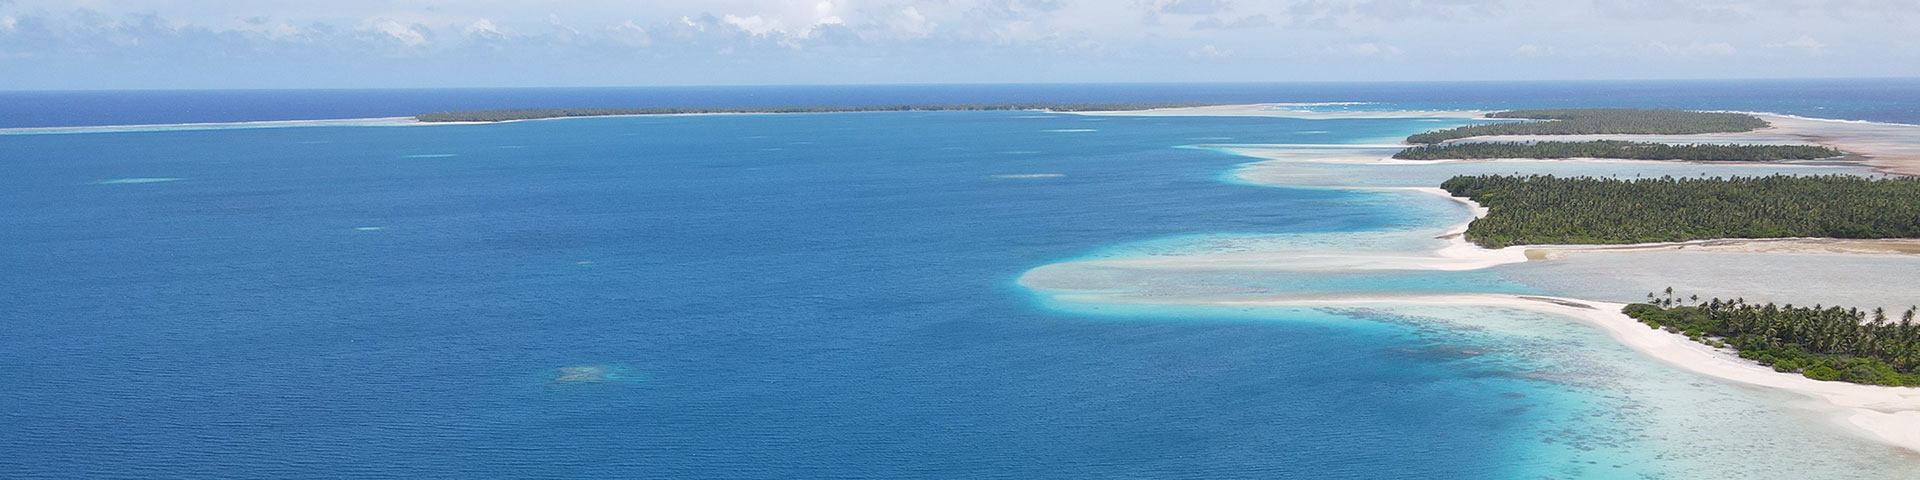 Small, green islands surrounded by turquoise sea